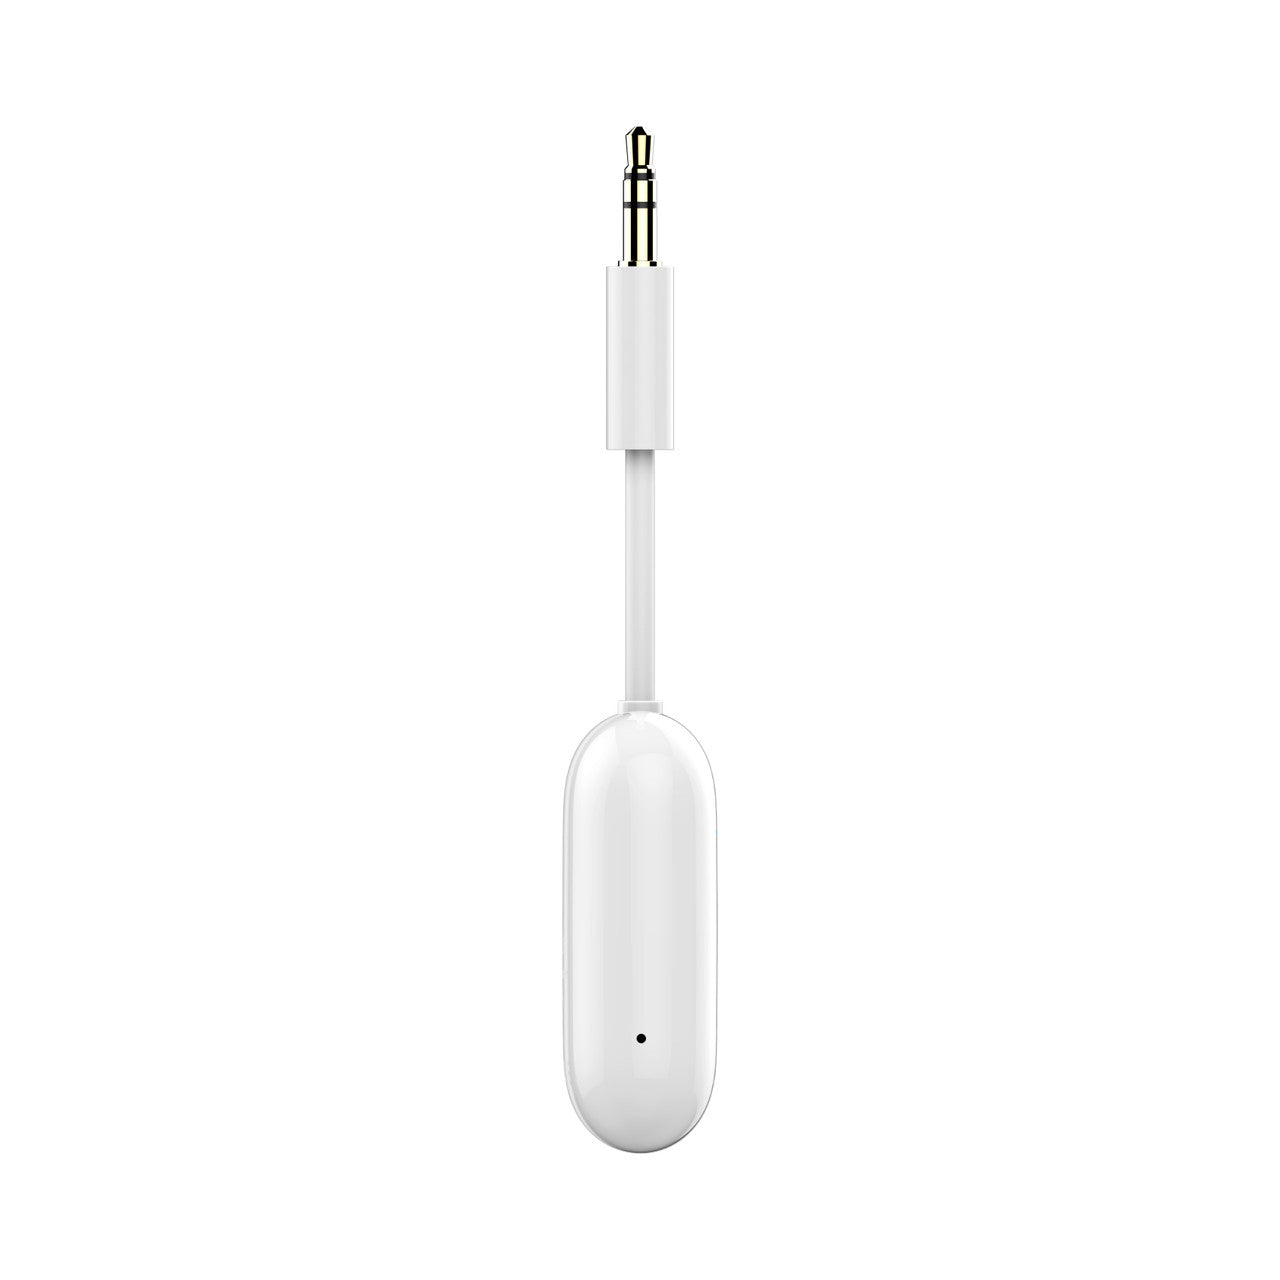 Image of Connect Air In-Flight Wireless Audio Adapter for AirPods.